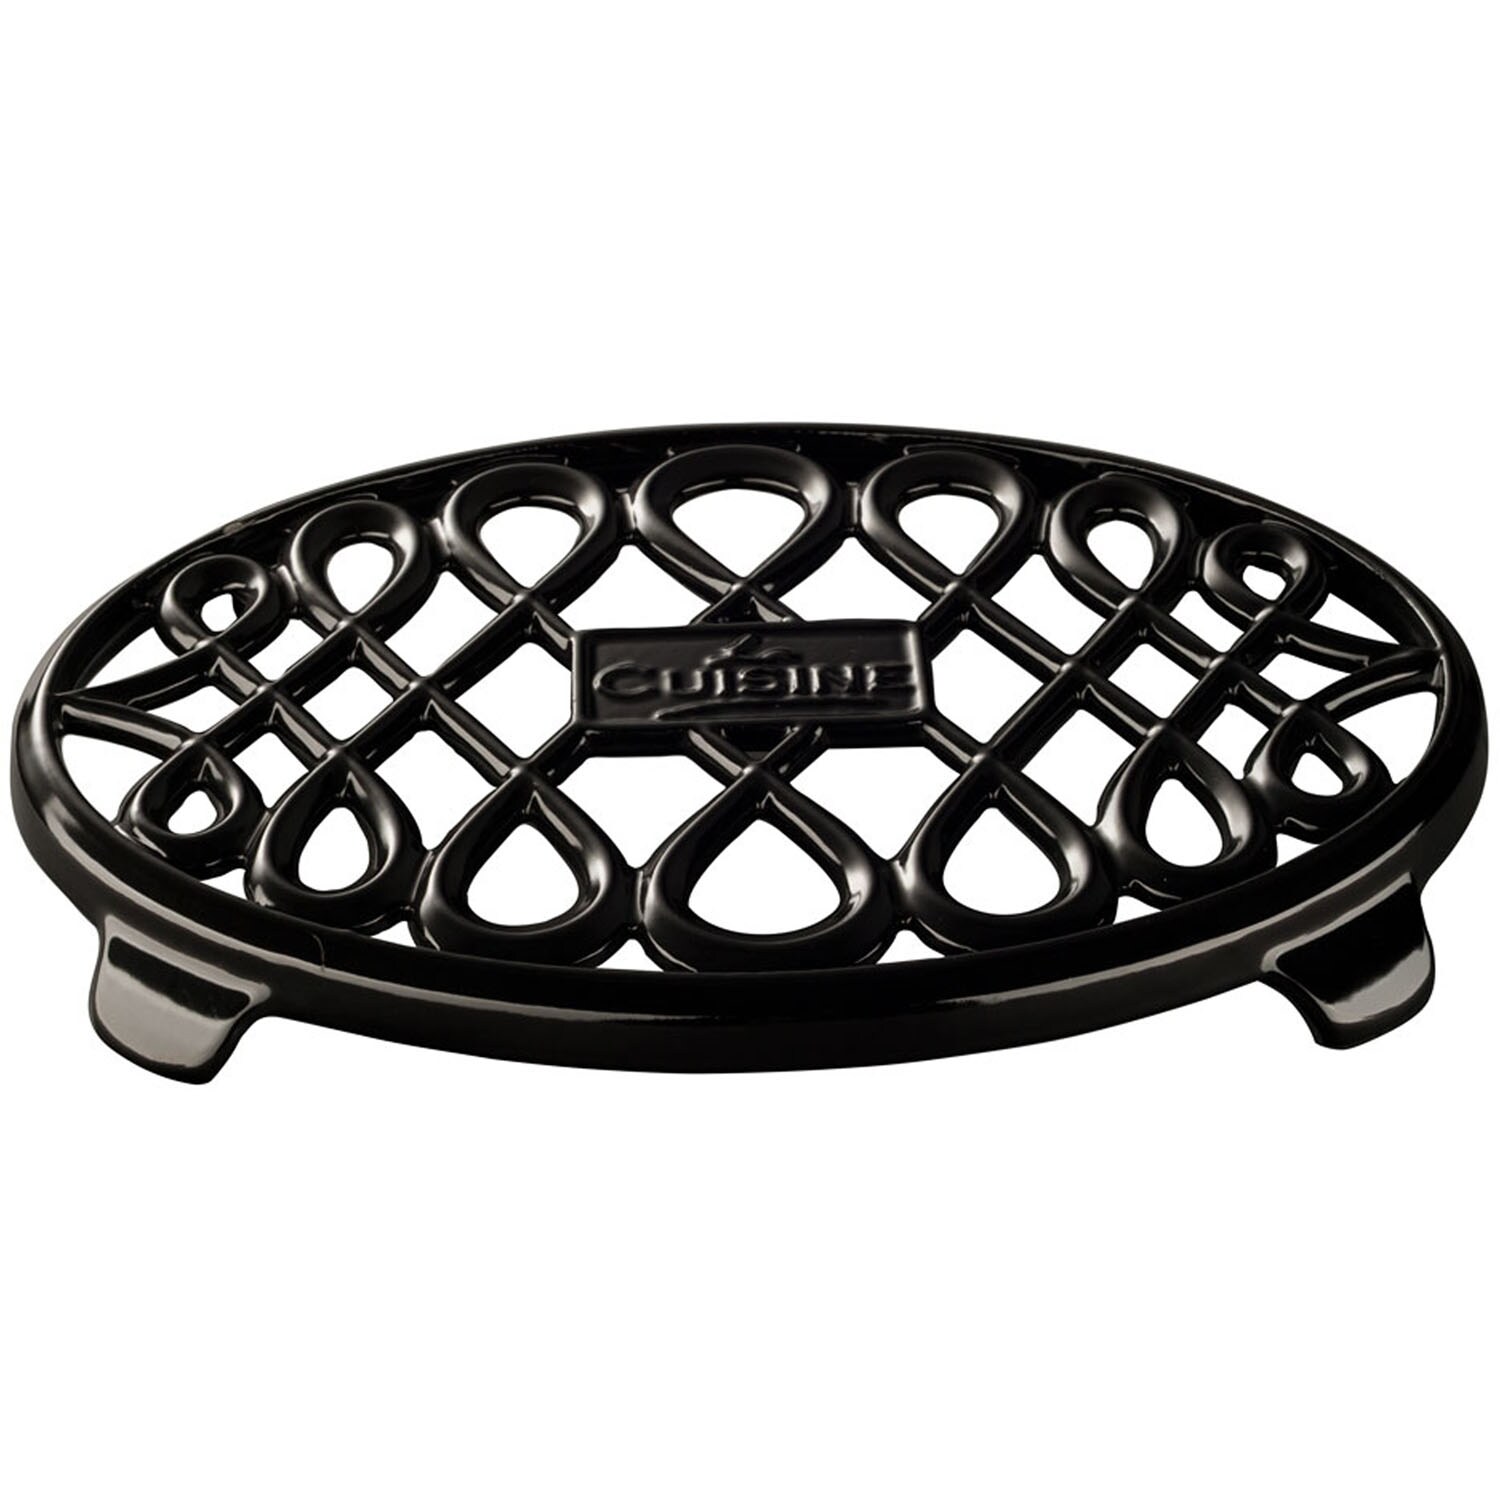 Grill Wire Racks used in Microwave 3 pack Silicone Rubber Feet For Trivets